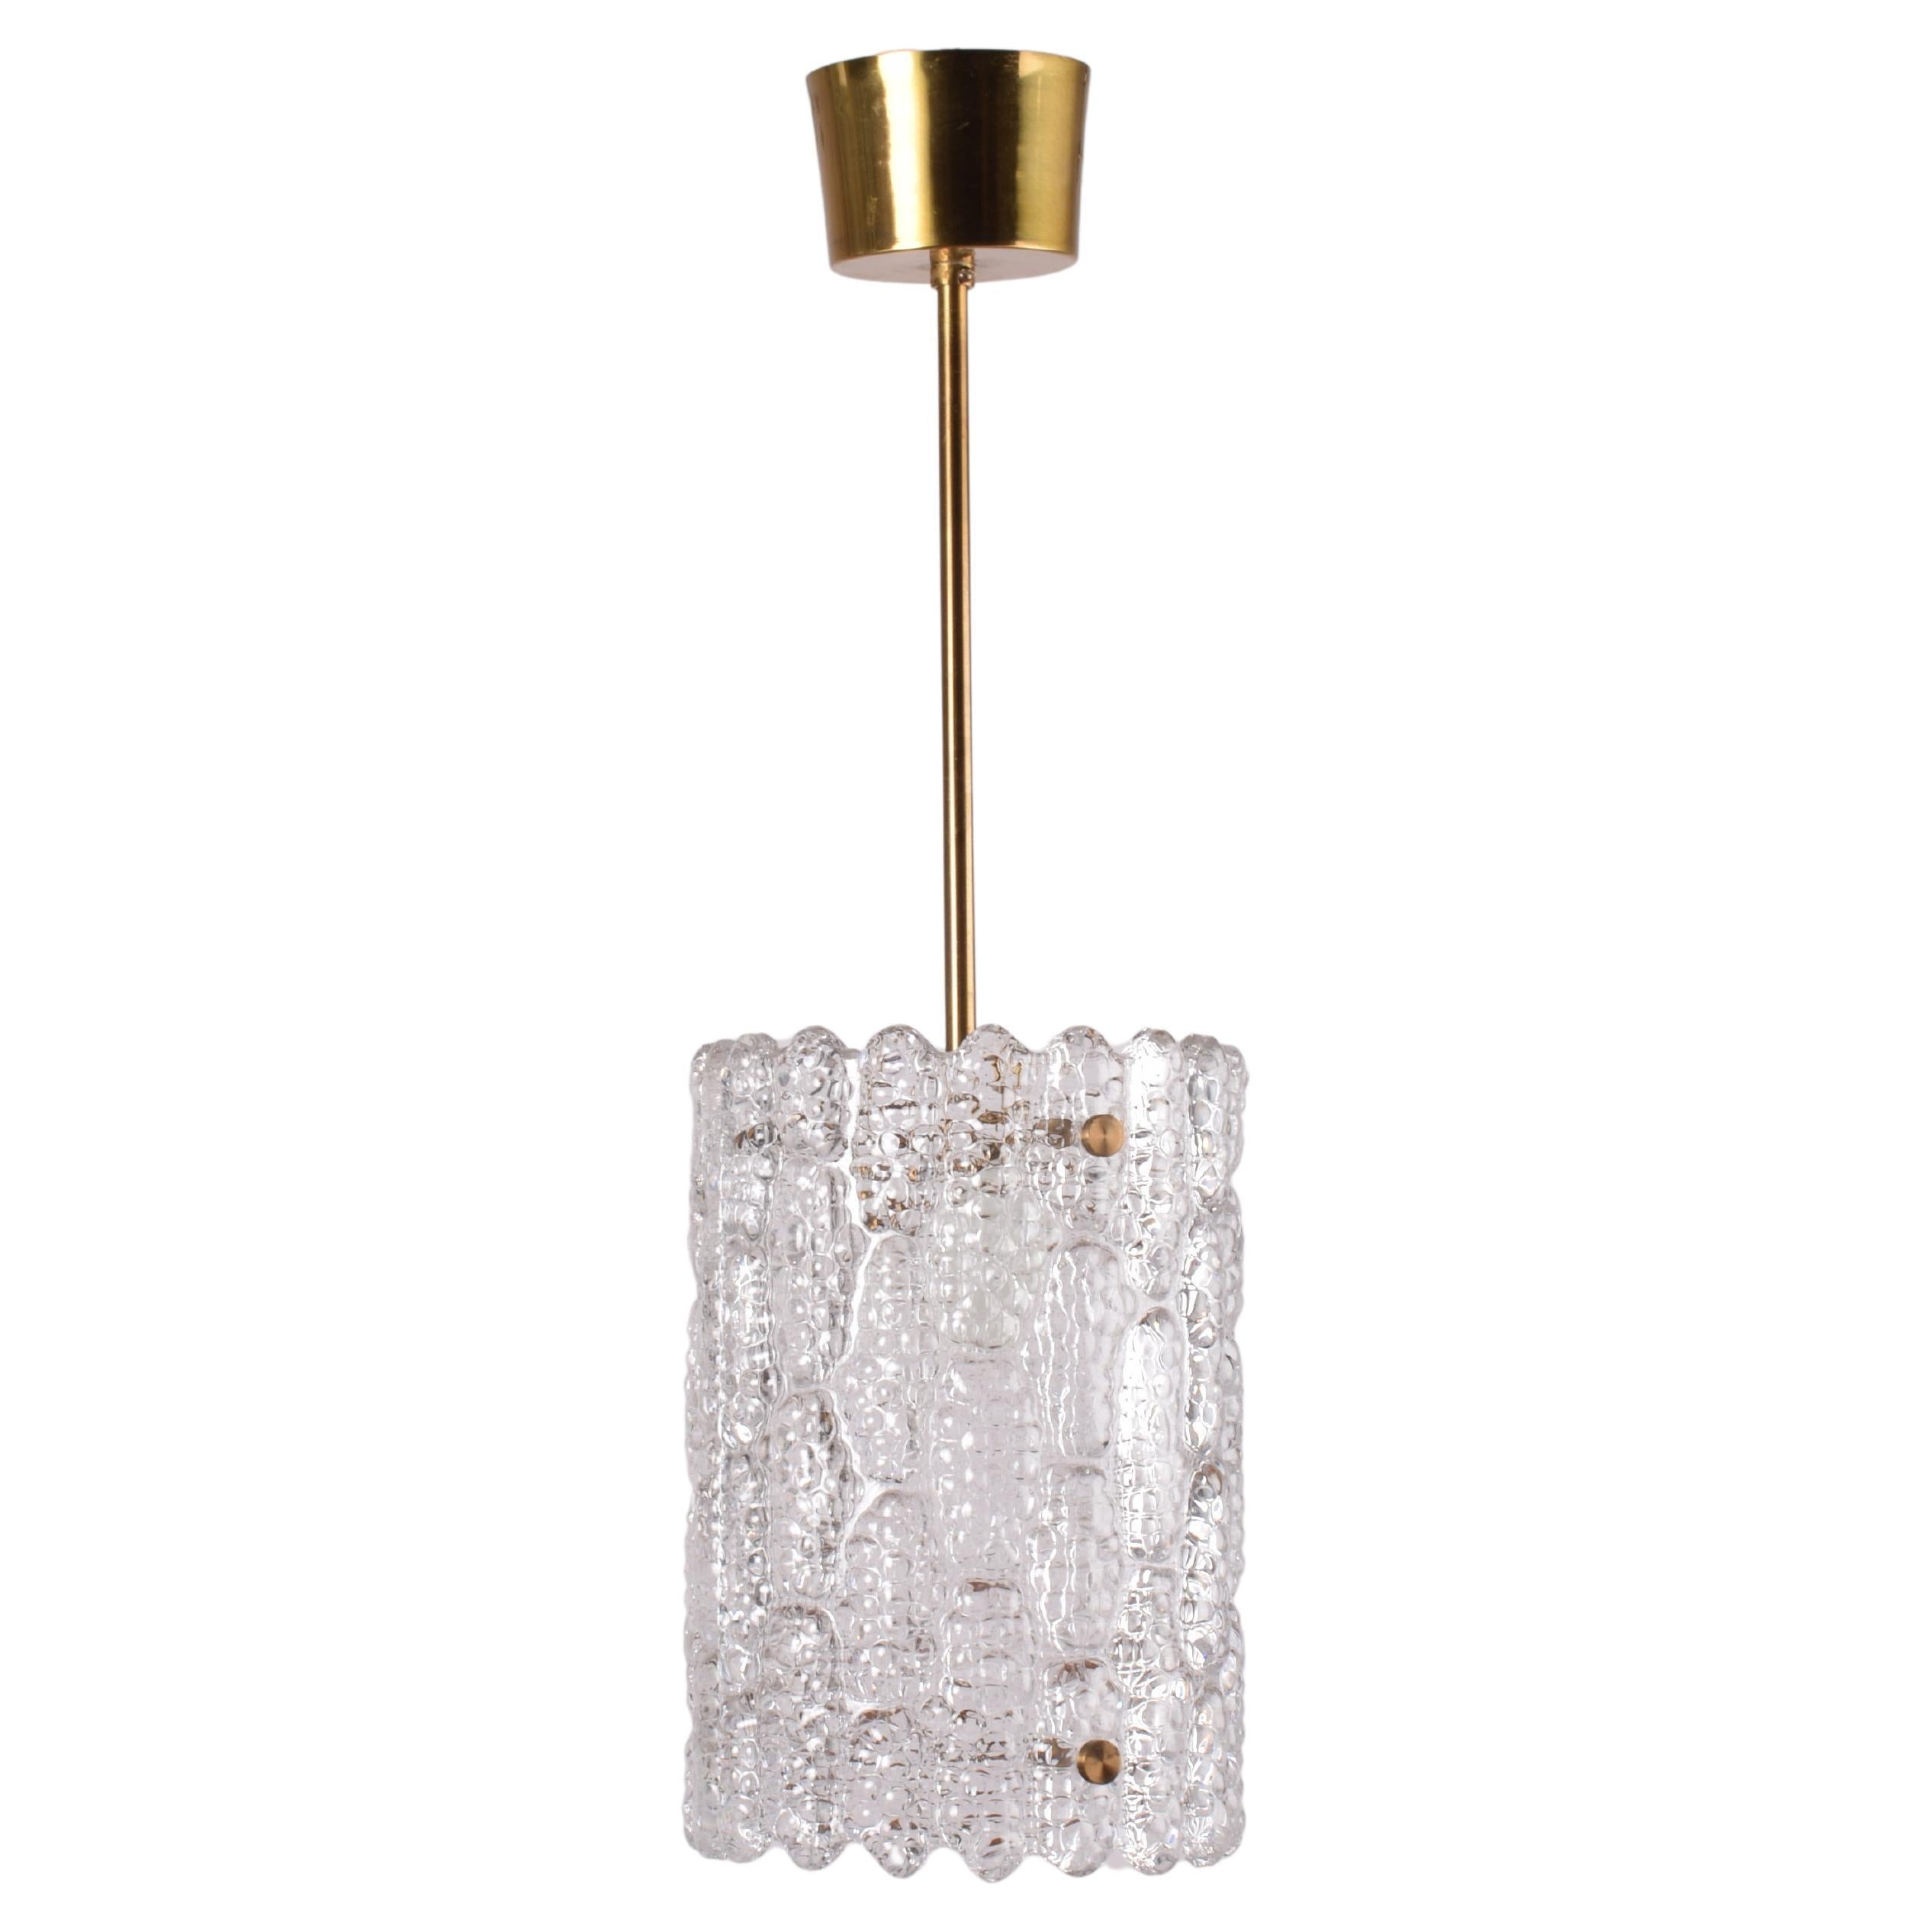 Carl Fagerlund for Orrefors Glass Pendant Ceiling Lamp with Brass, Sweden 1960s For Sale